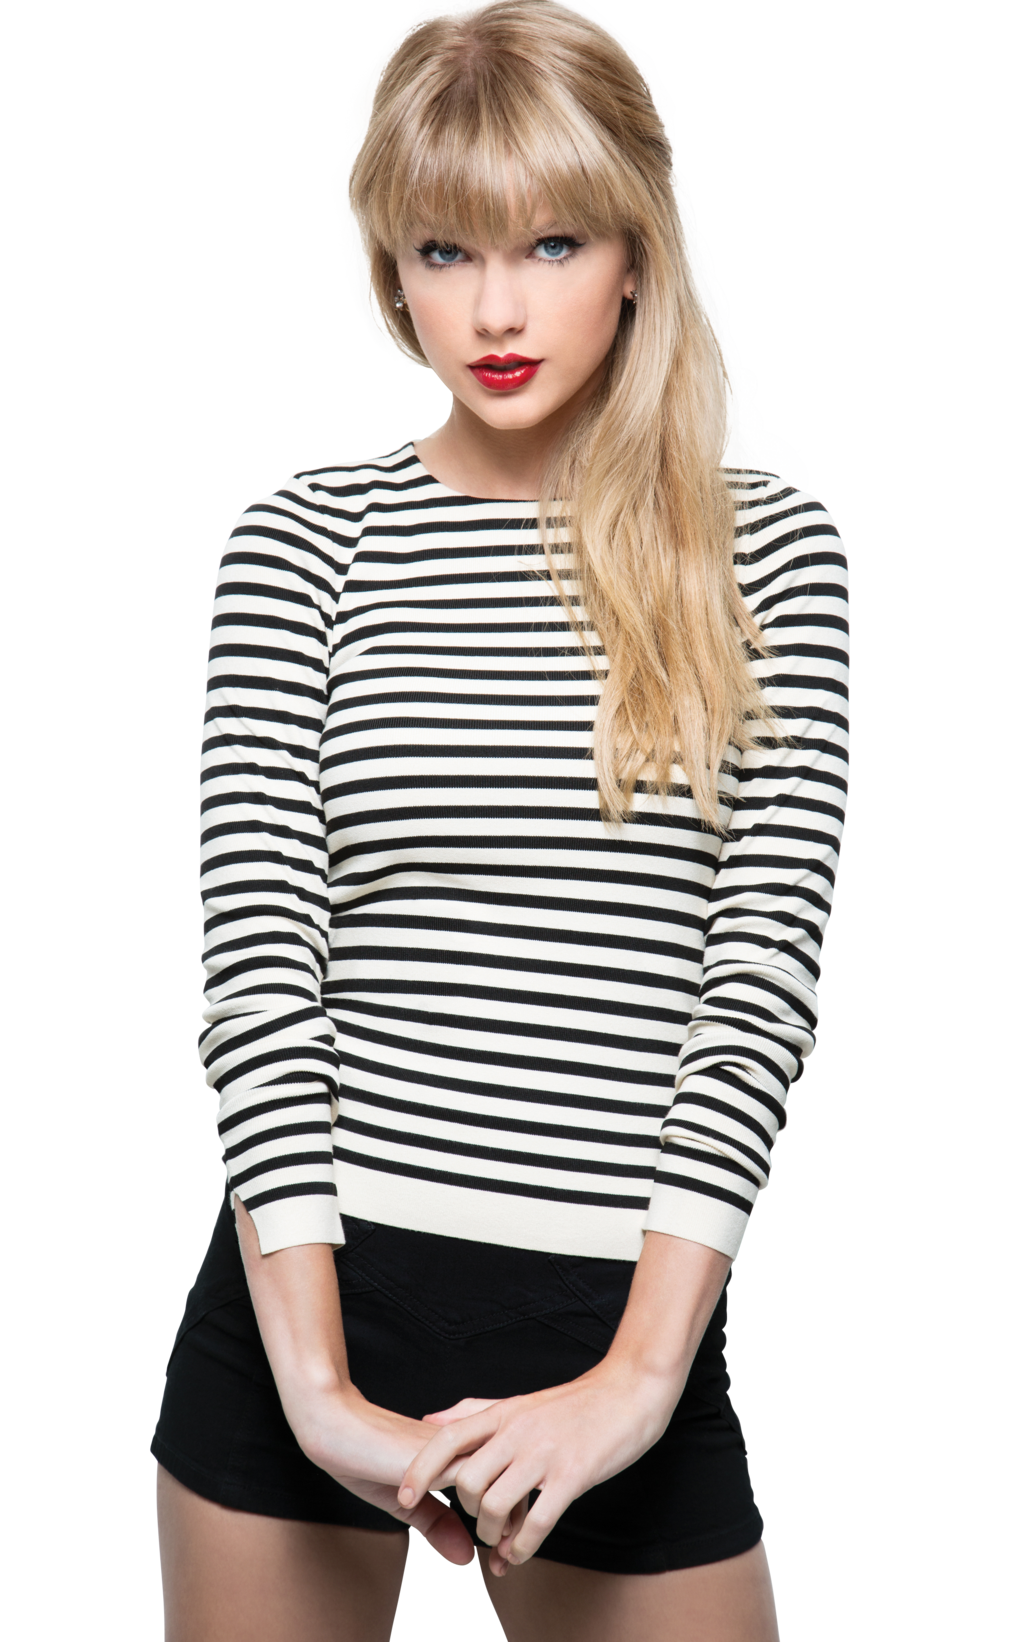 Taylor Swift PNG Photo Image